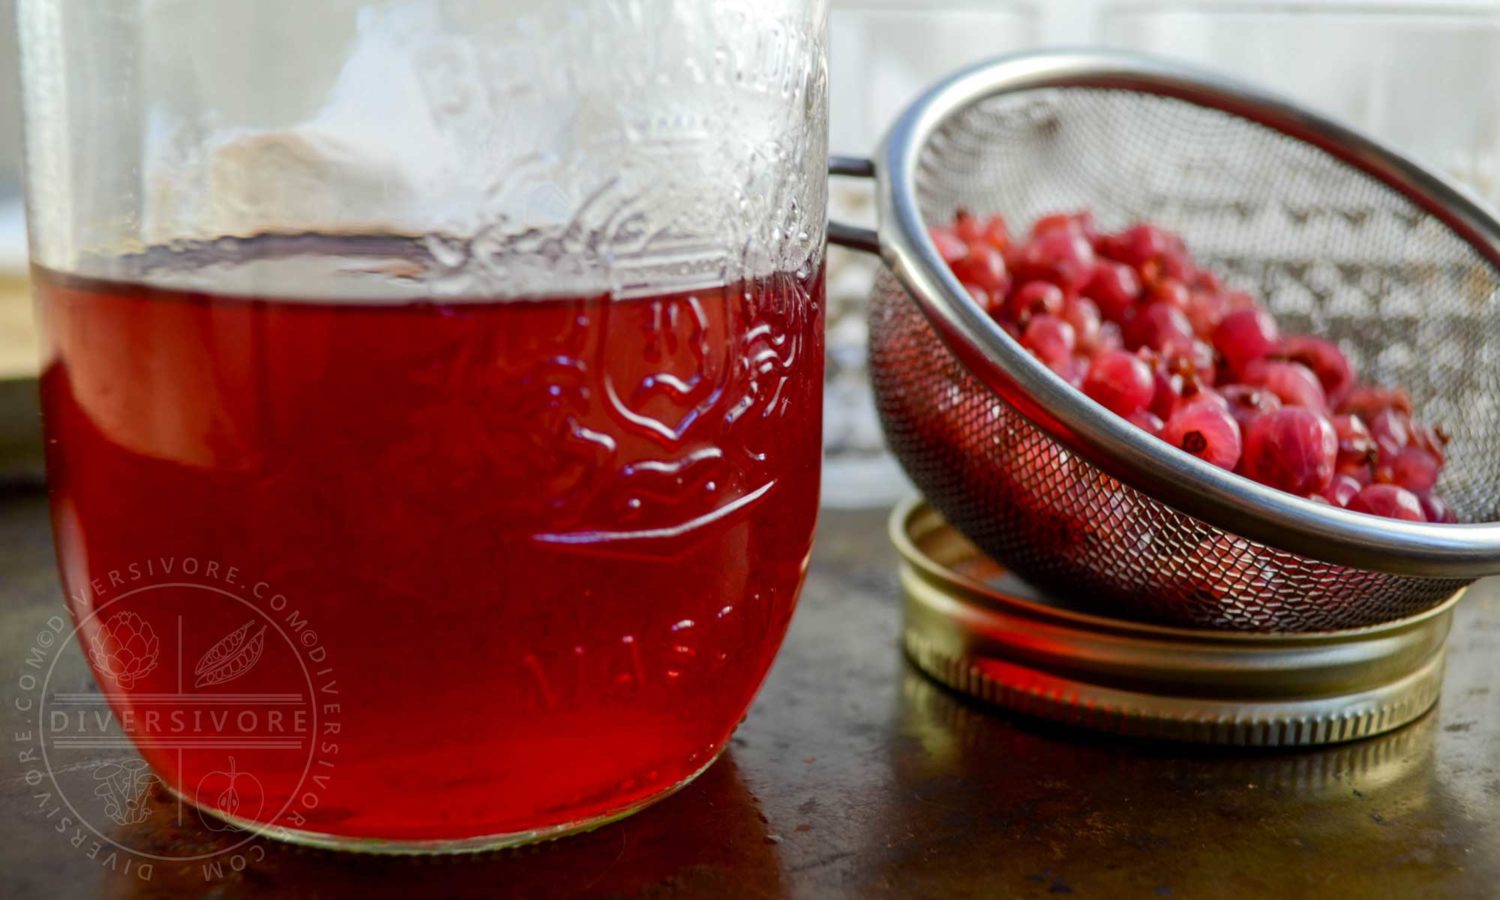 Homemade redcurrant gin - shown here with the infused currants in a strainer - Diversivore.com